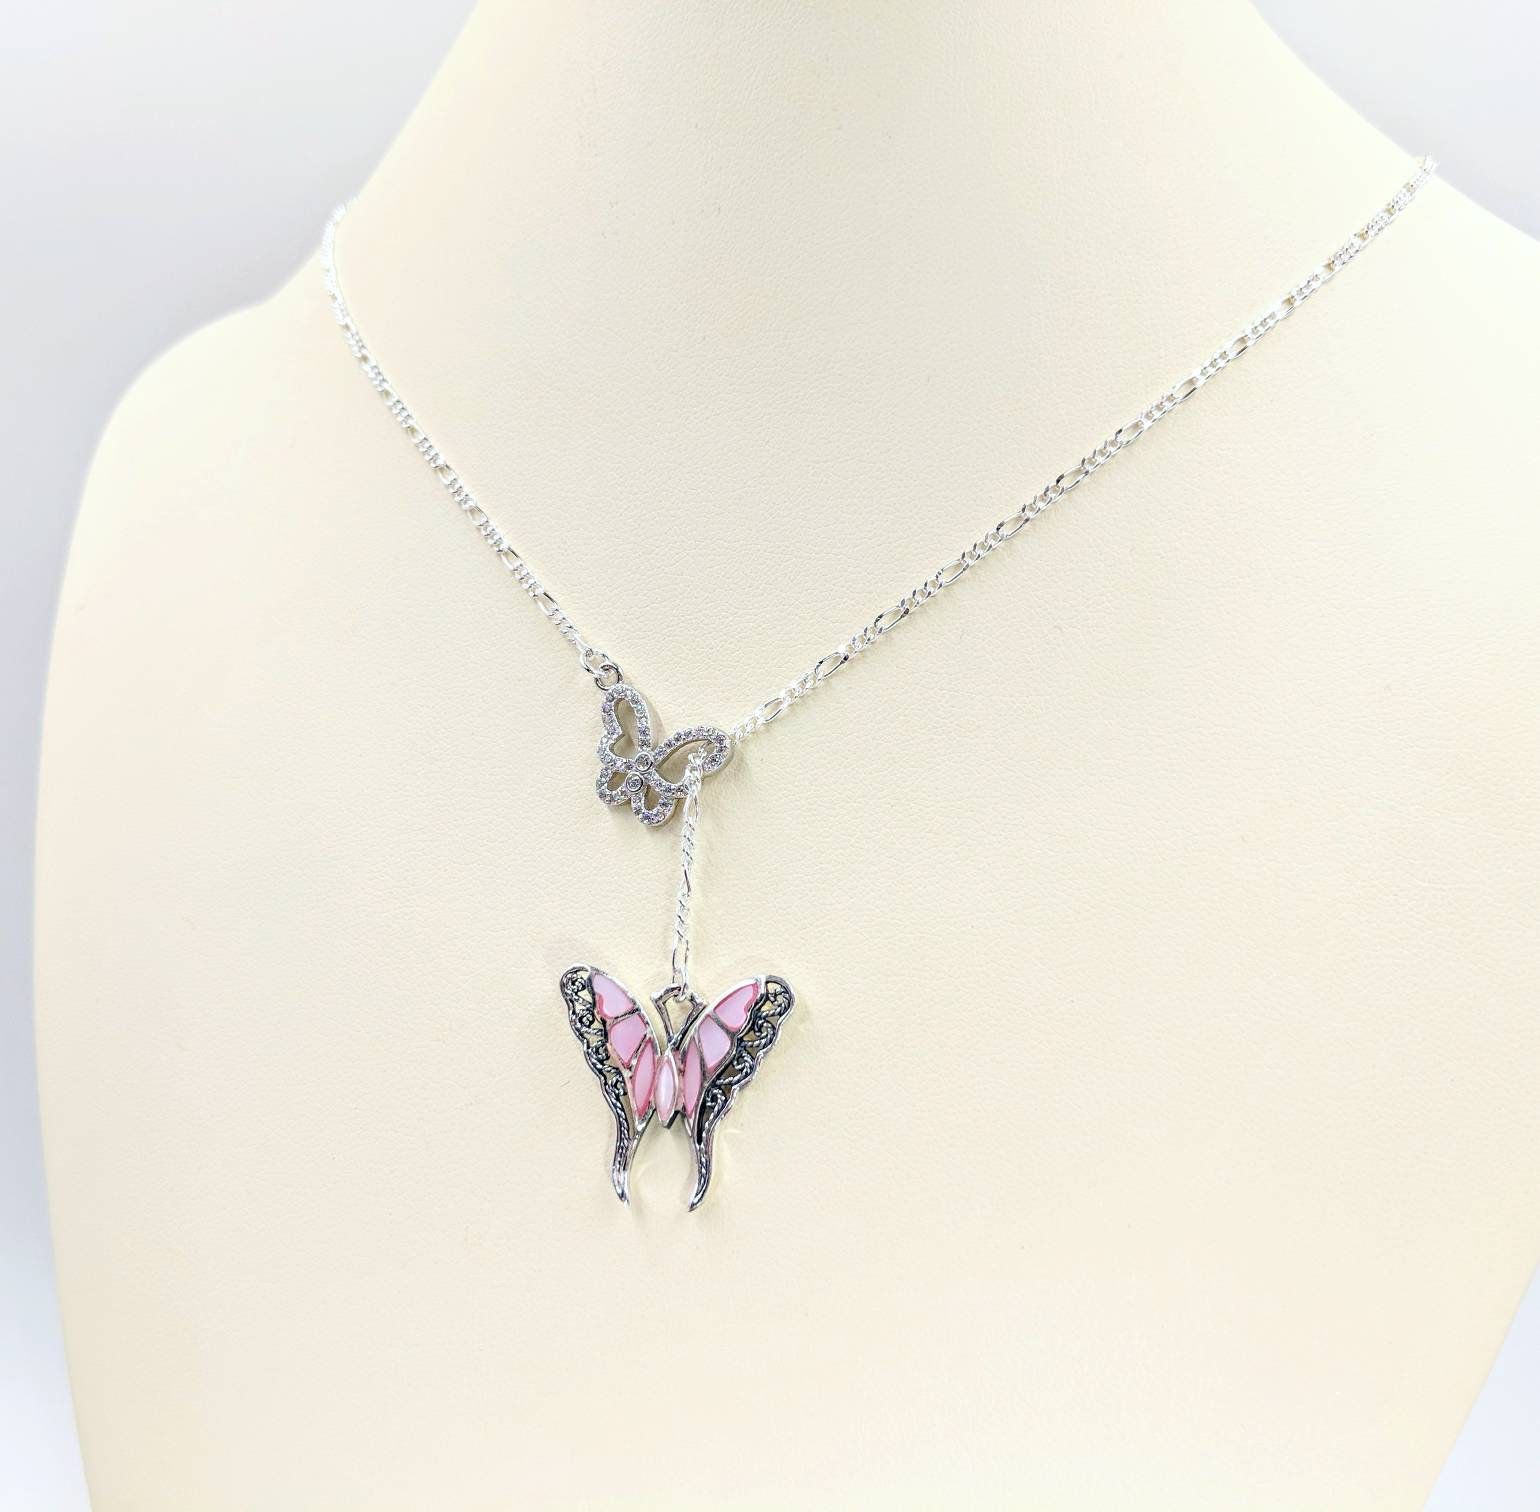 Adjustable Pink Pearl Butterfly Infinity Lariat Y Necklace W 925 Silver  Filigree Butterfly Pendant, Pave Cz Butterfly Center, Infinity Close Intended For Most Current Sparkling Butterfly Y  Necklaces (View 4 of 25)